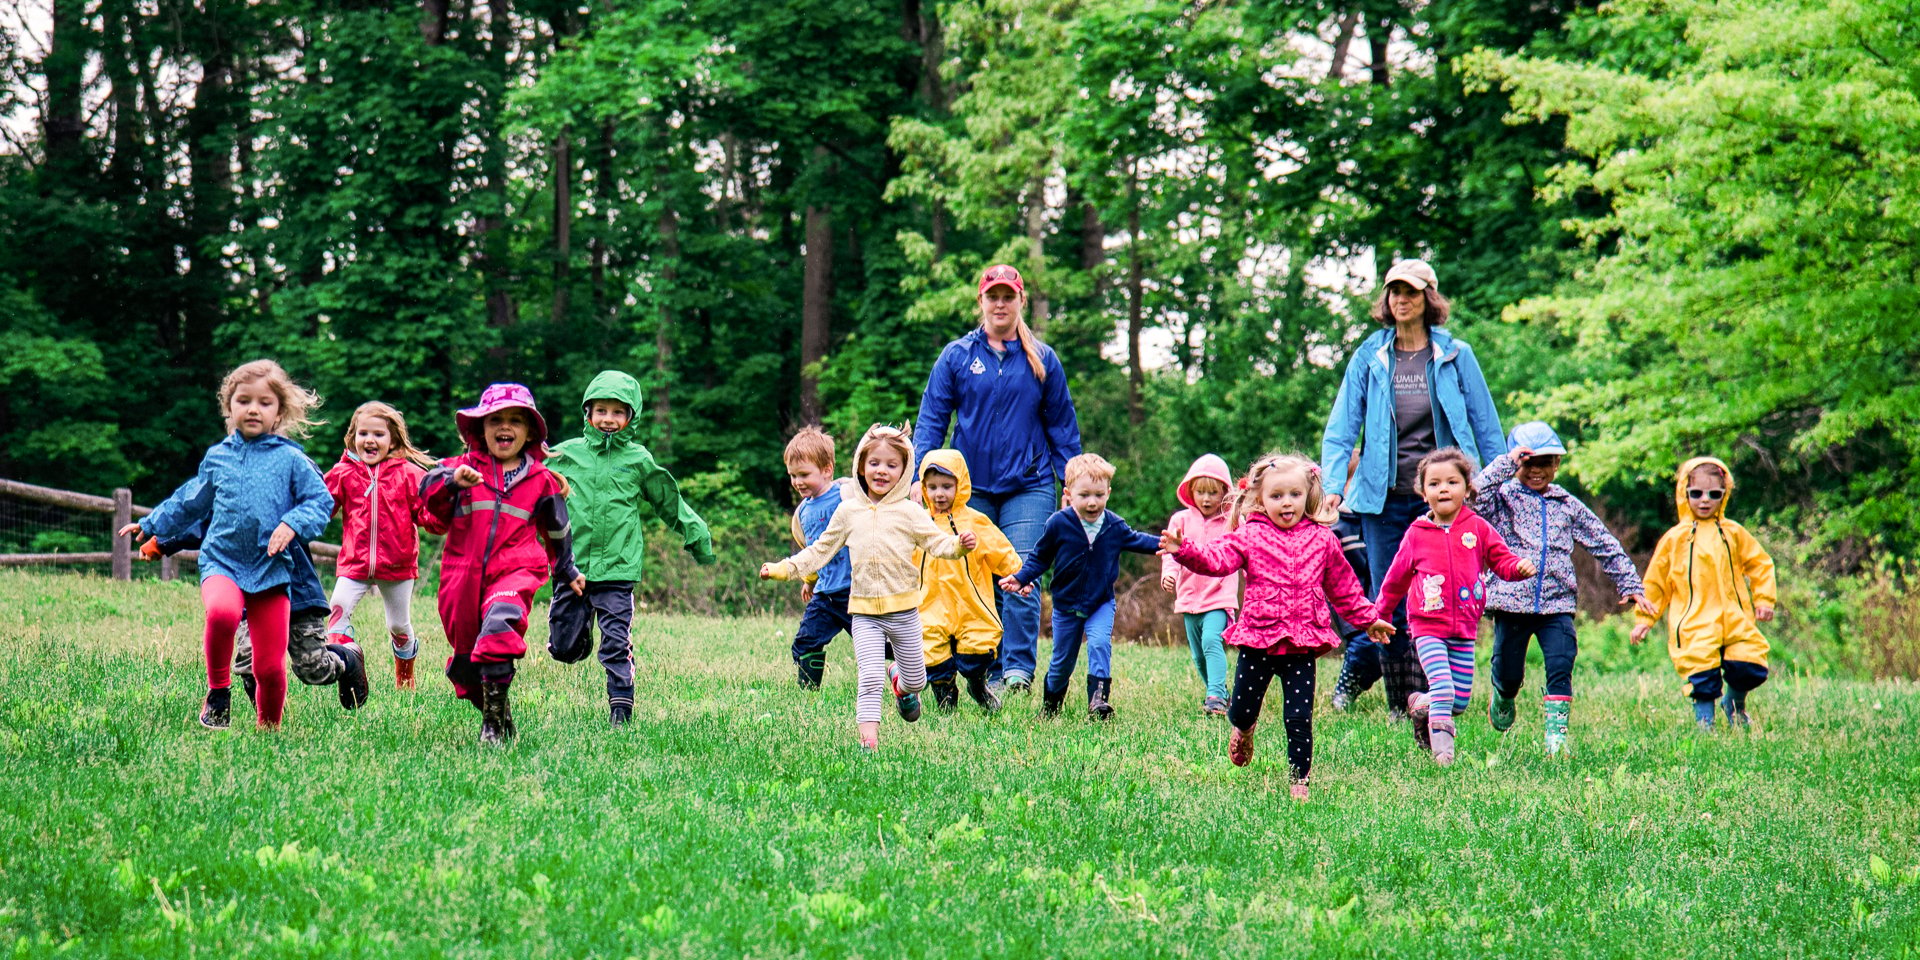 A group of preschoolers at Drumlin Farm Community Preschool running across a field surrounded by forest, with two teachers smiling and walking behind them